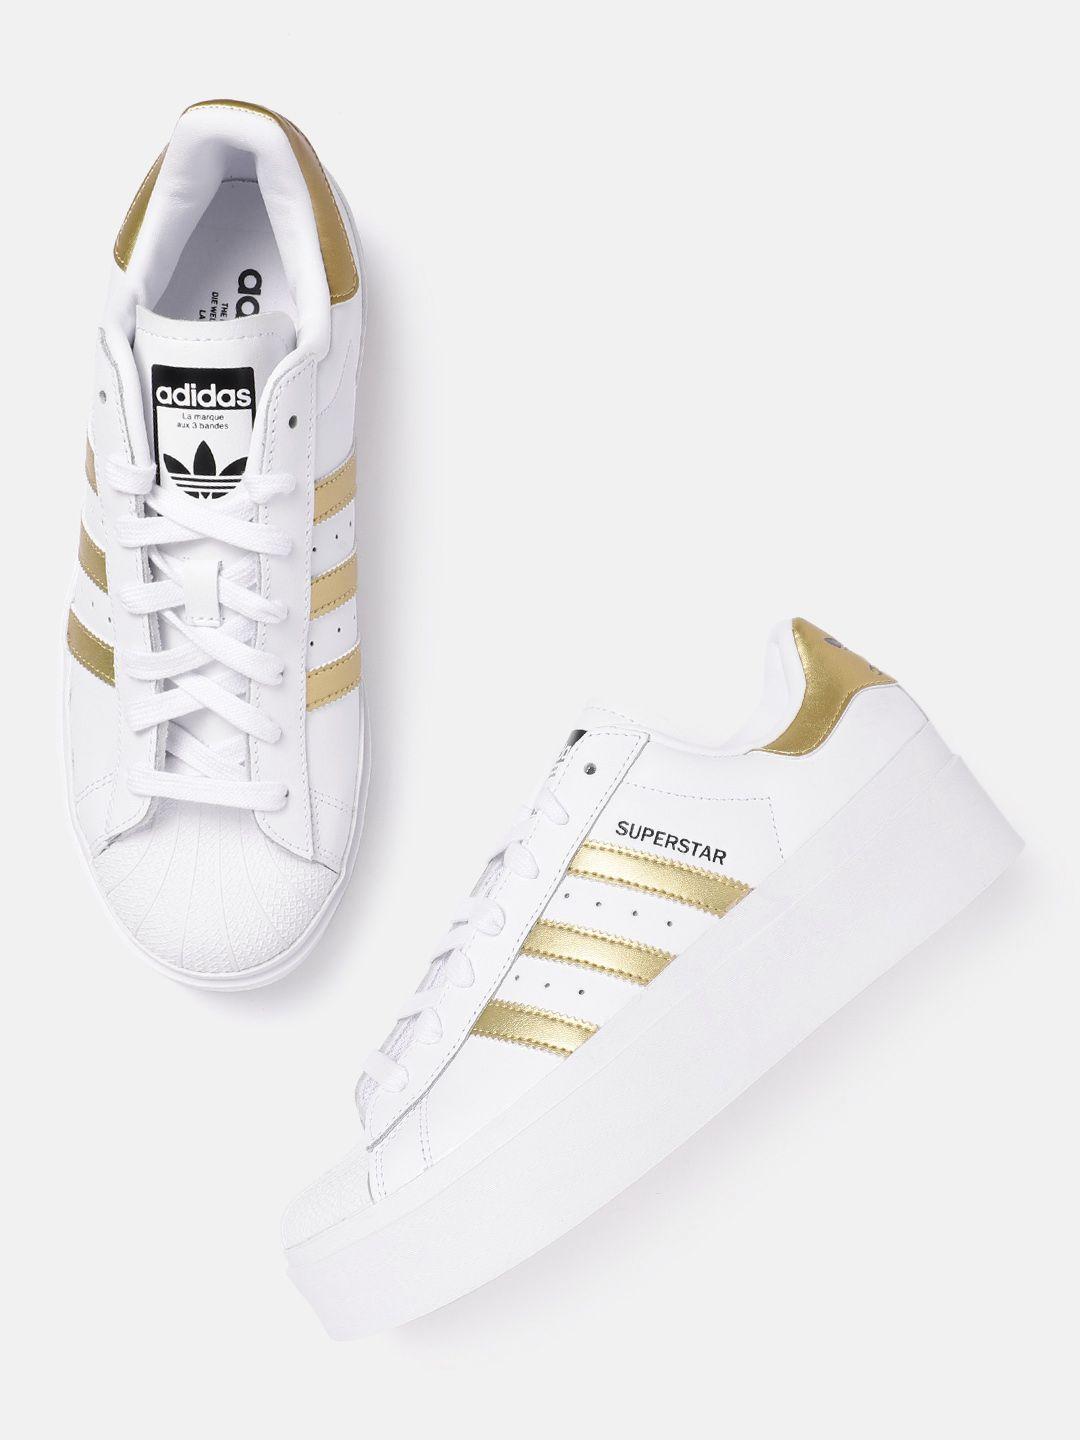 adidas-originals-women-striped-superstar-bonega-sneakers-with-perforated-detail